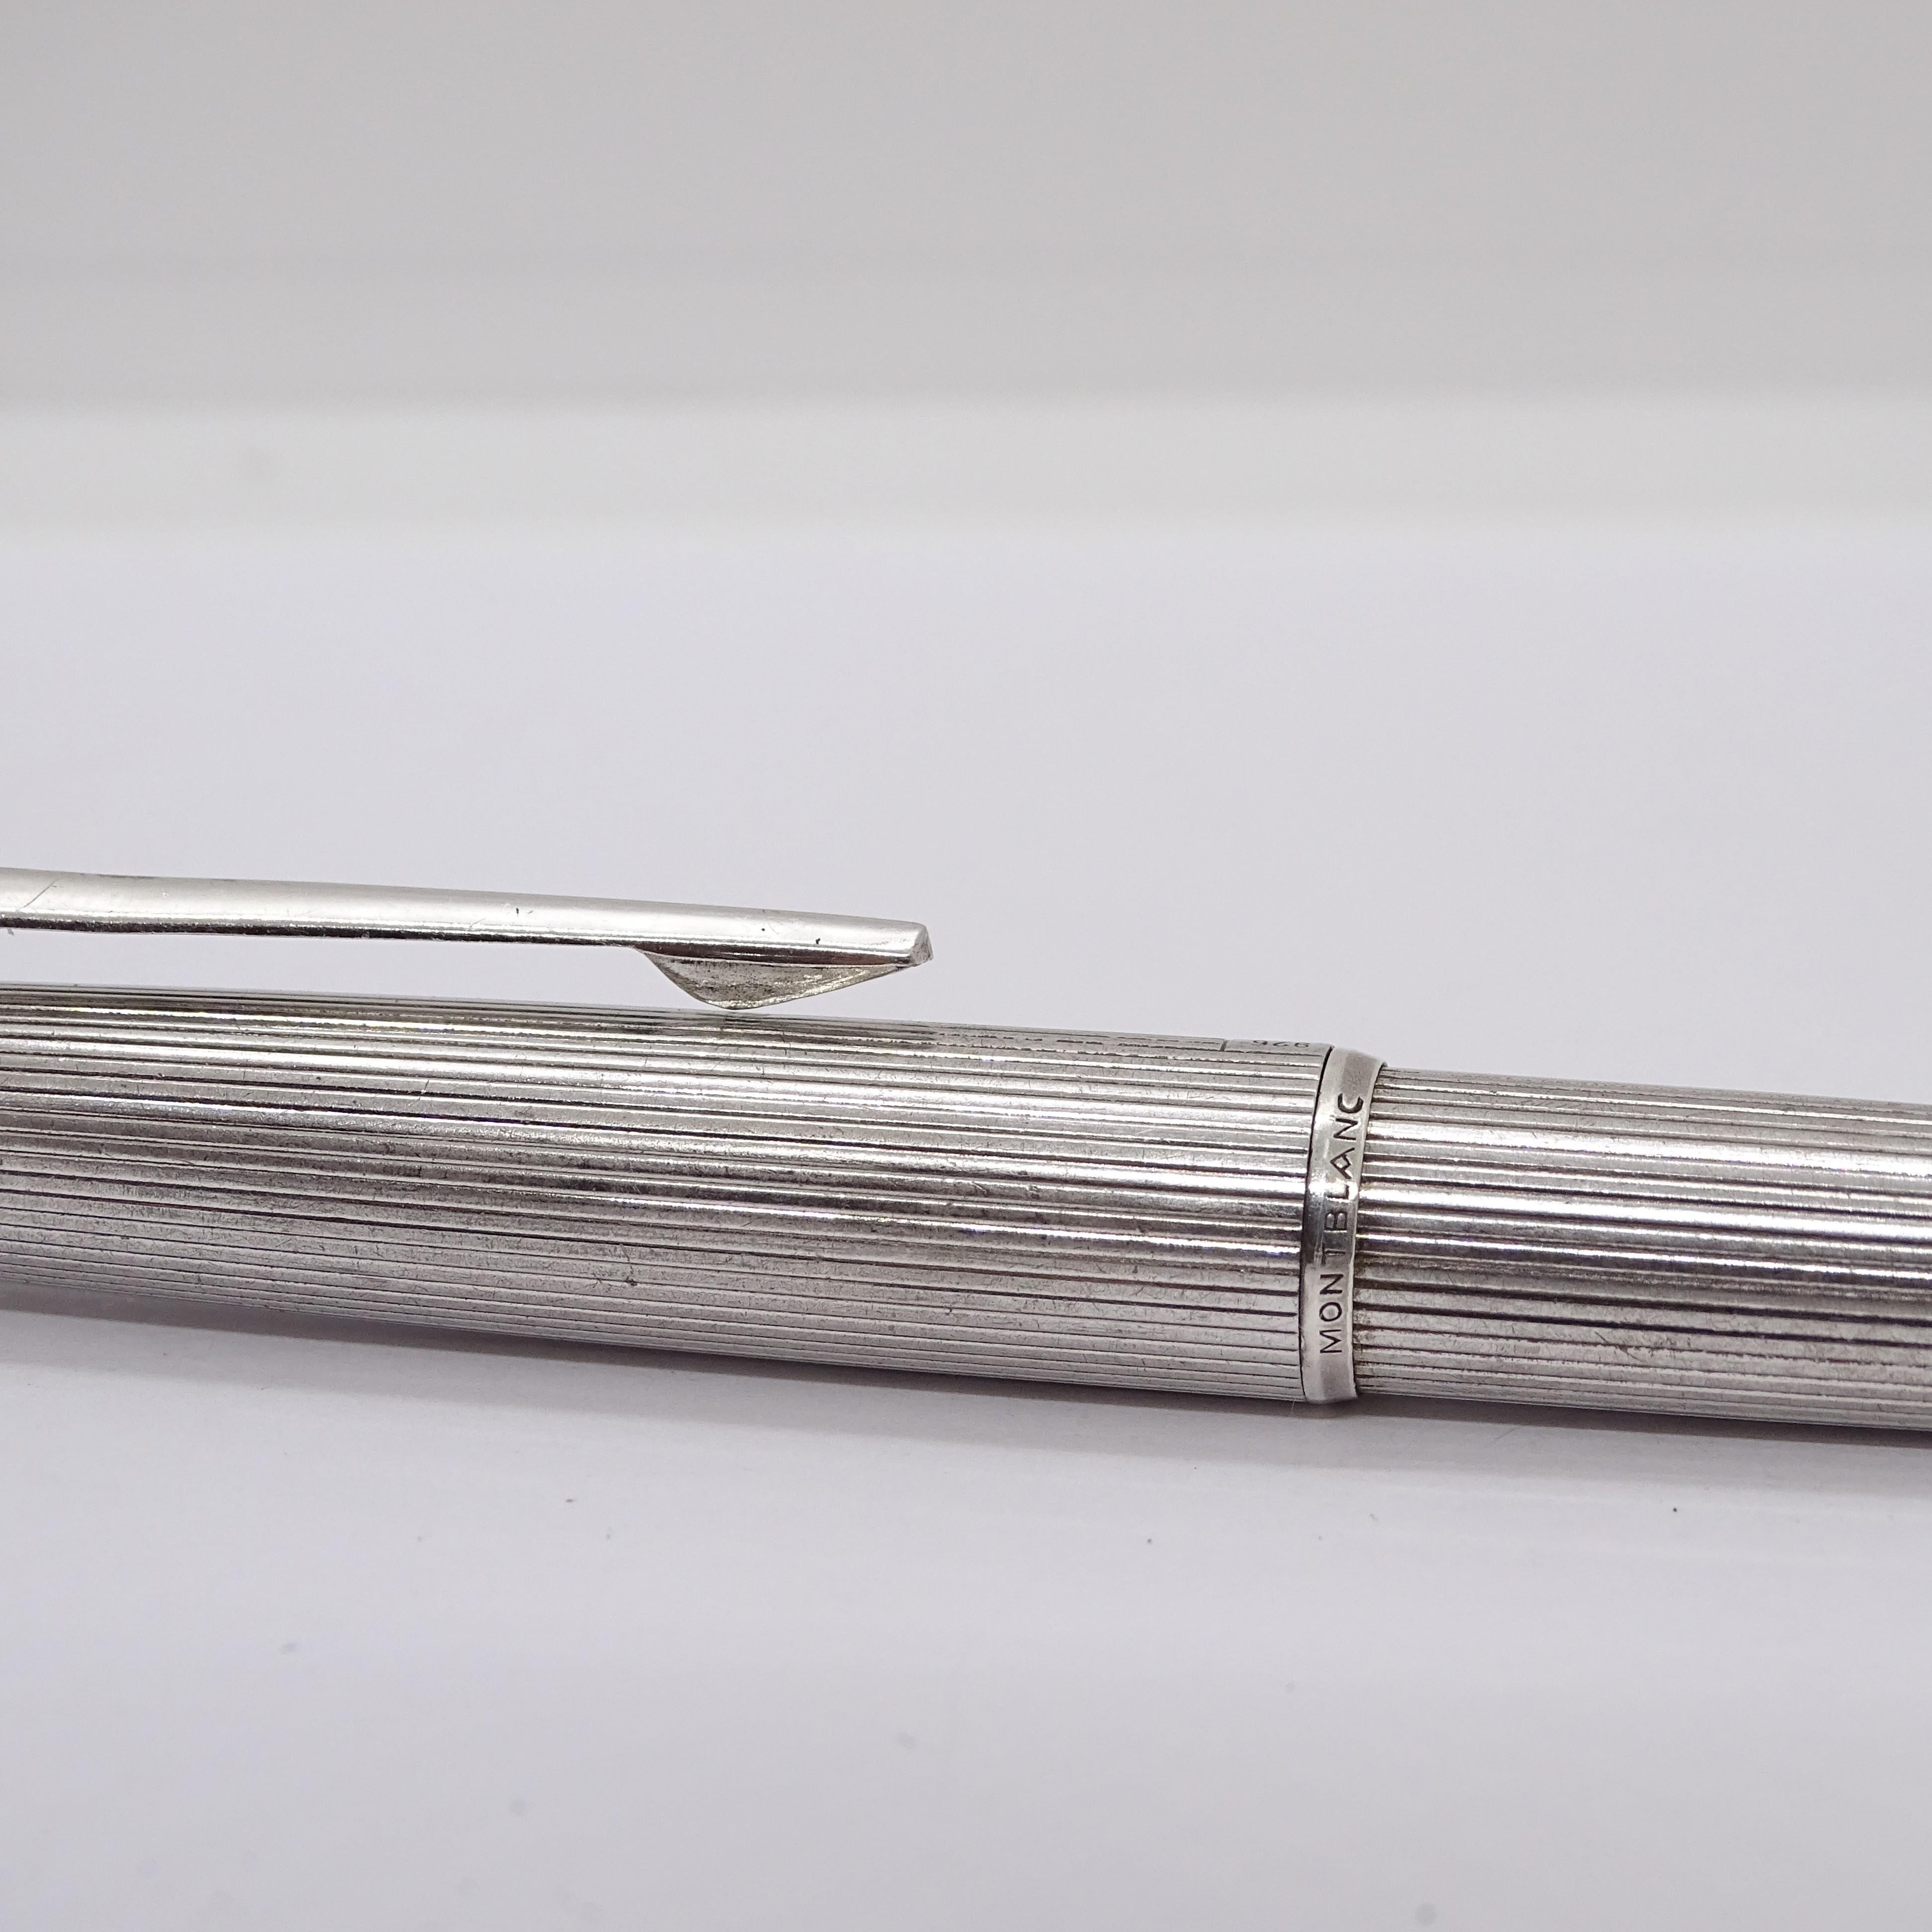 Montblanc writing set, 1266 pen and 1666 mechanical pencil, 925 silver, 80's 12